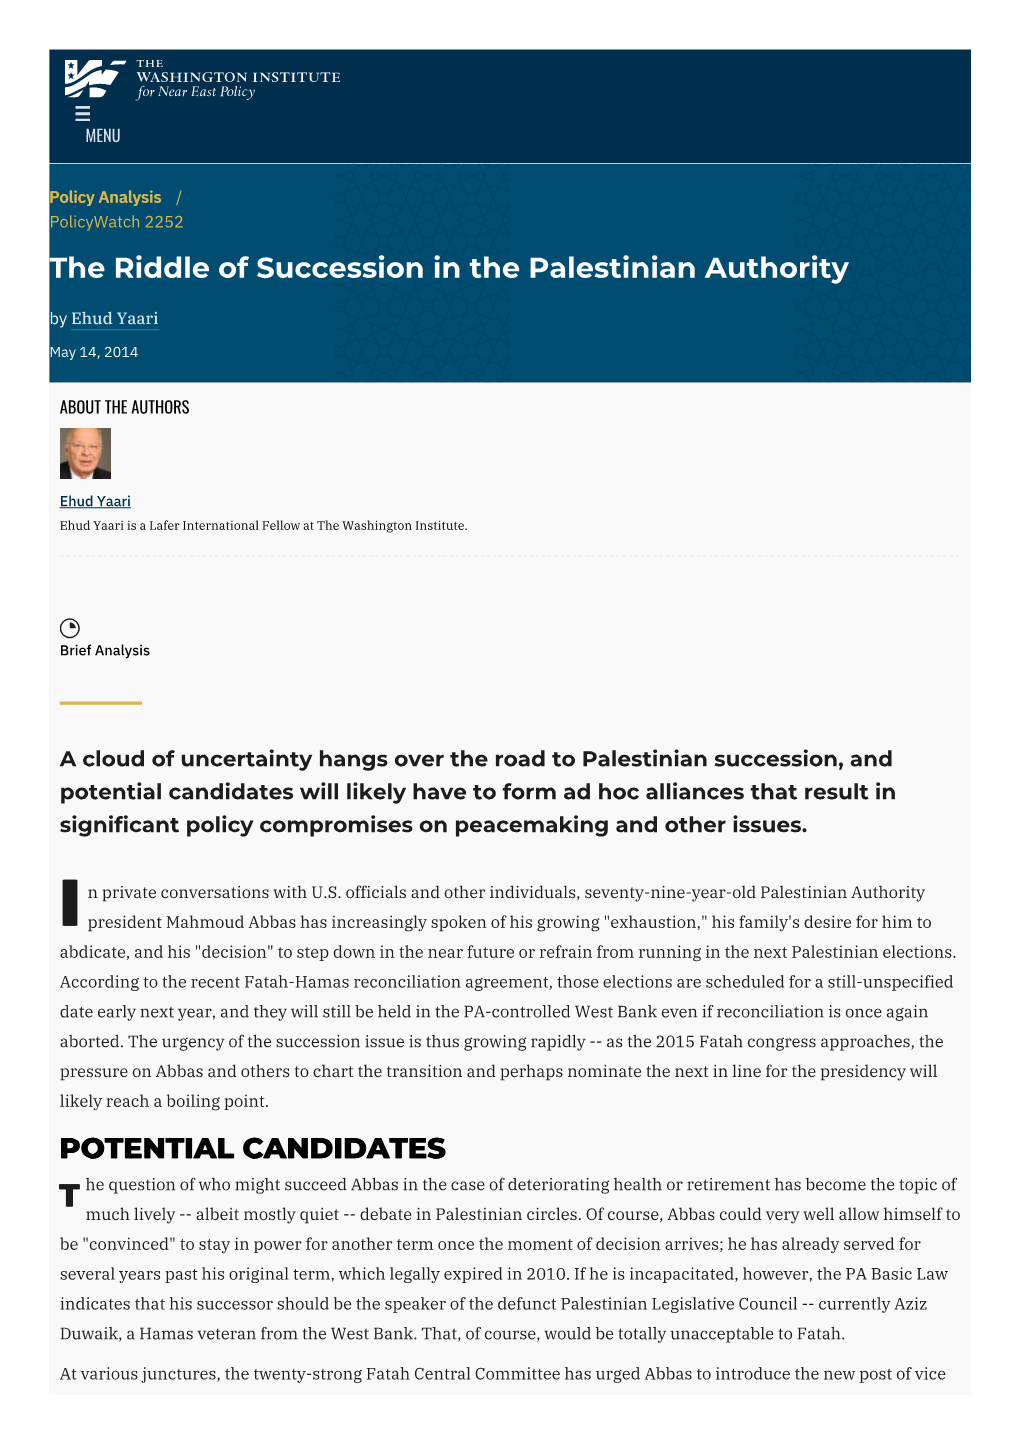 The Riddle of Succession in the Palestinian Authority | The